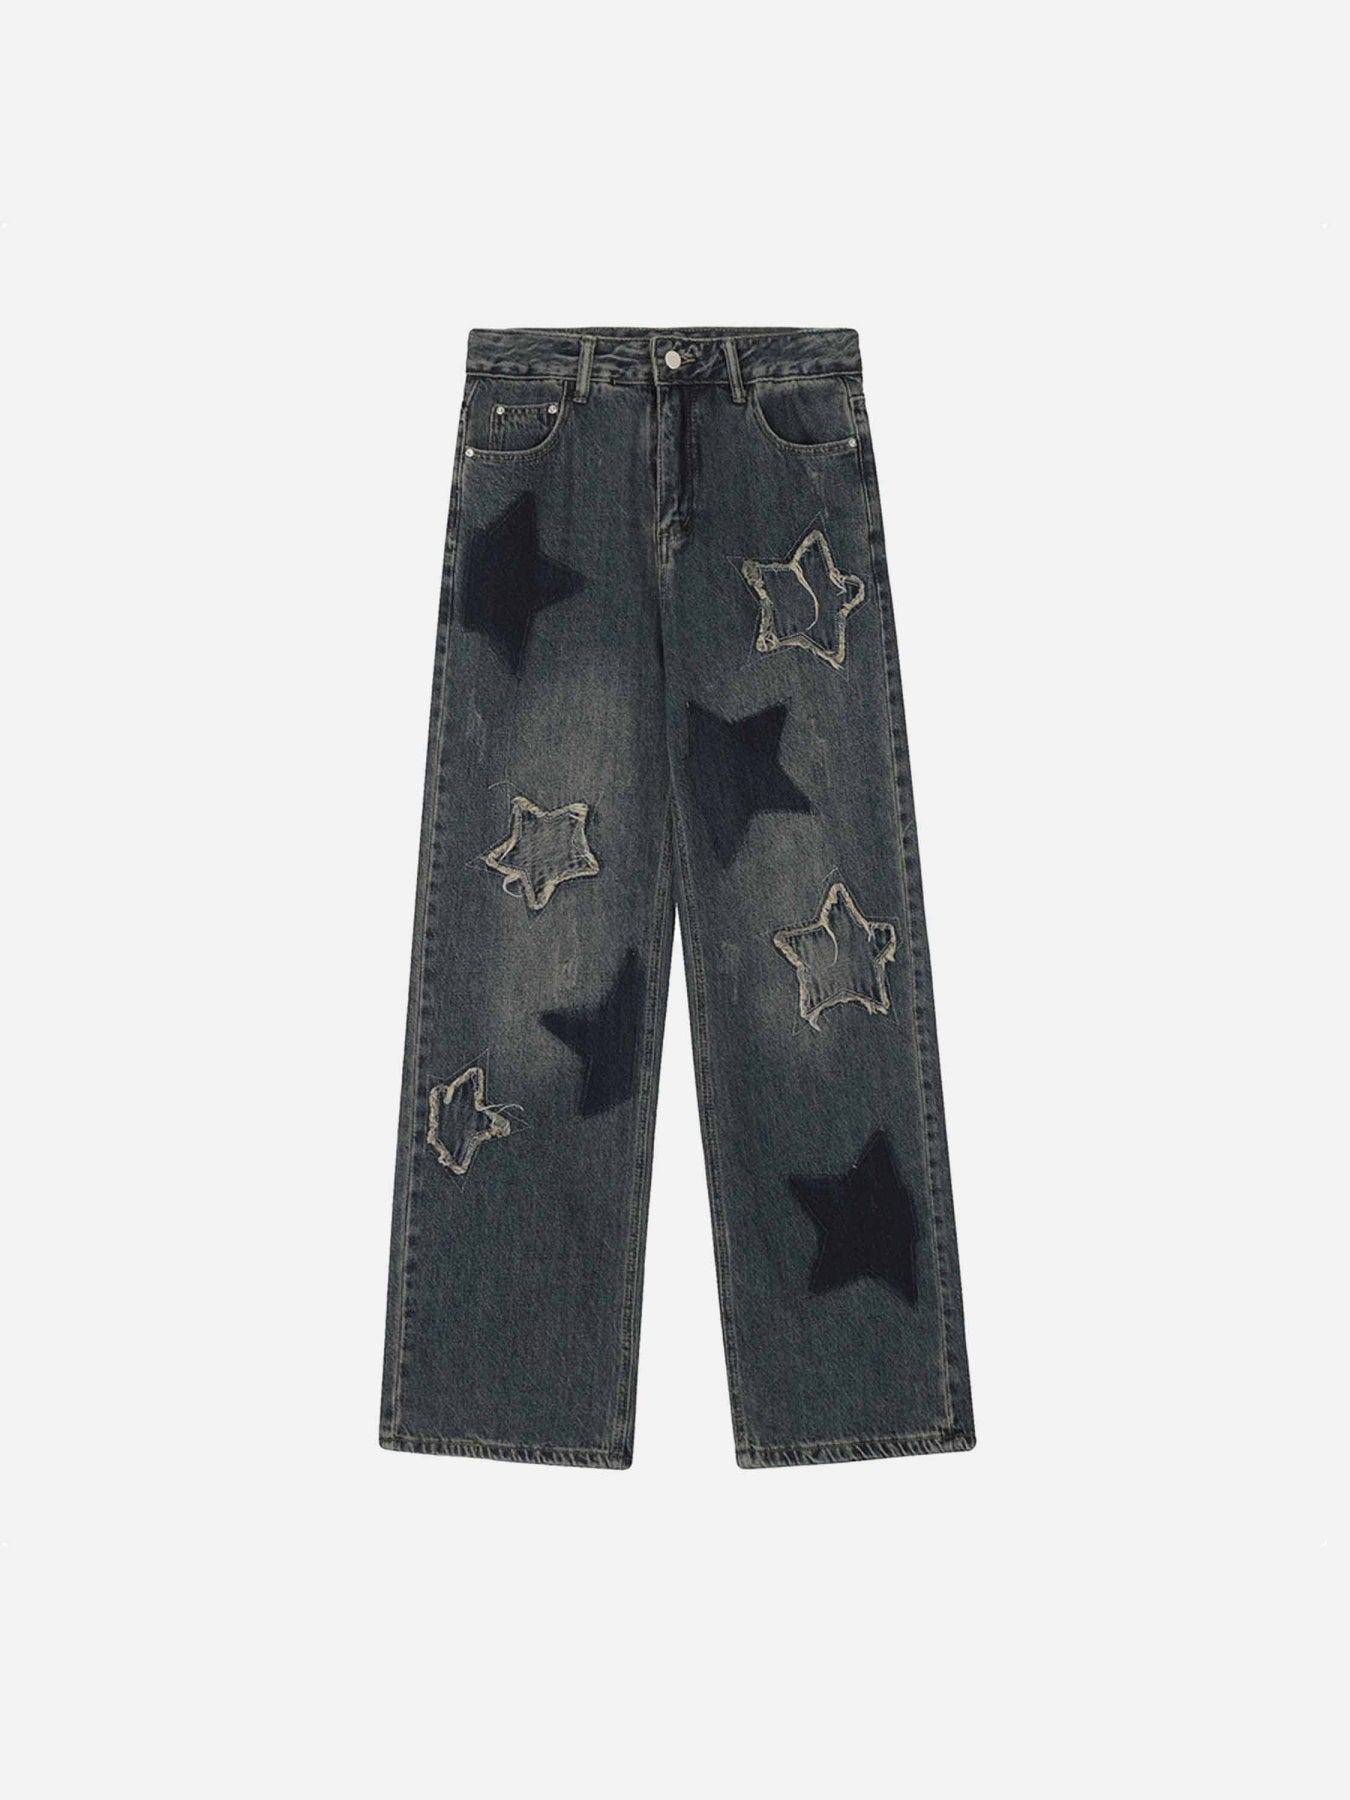 Thesupermade Airbrushed Pentagram Applique Jeans - 1656